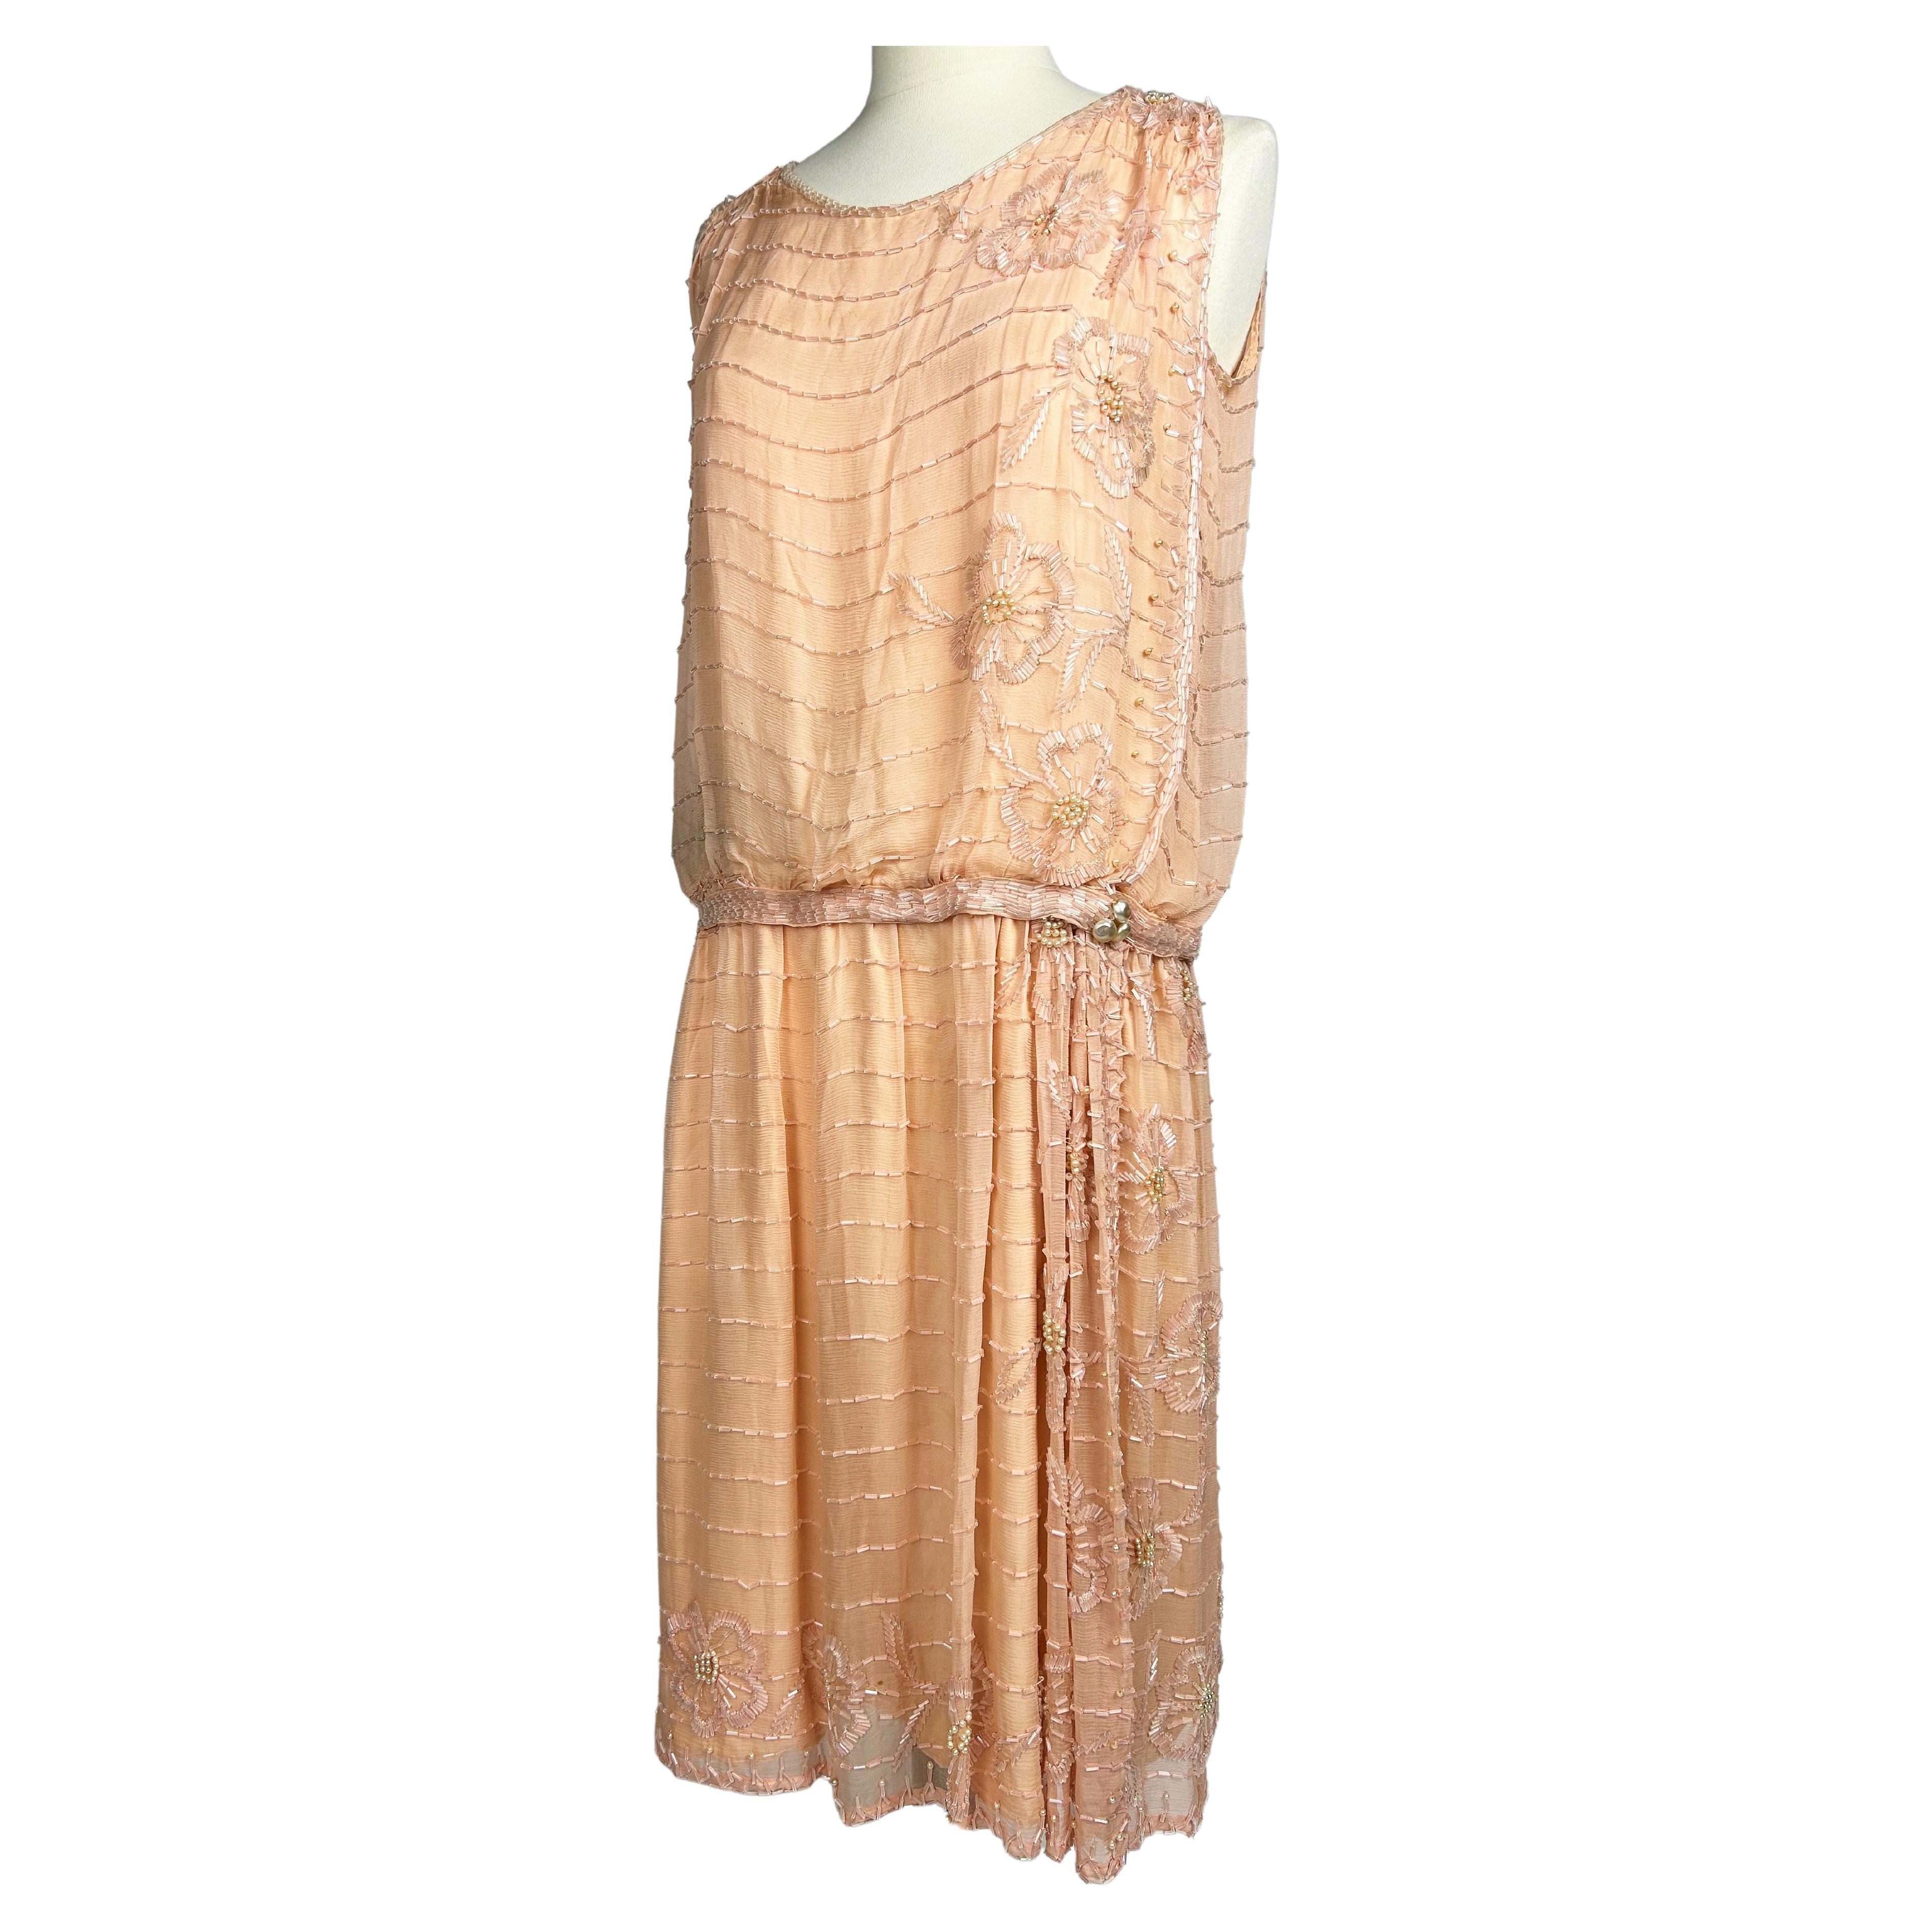 A Salmon embroidered Chiffon Flapper Dress - France Circa 1925 For Sale